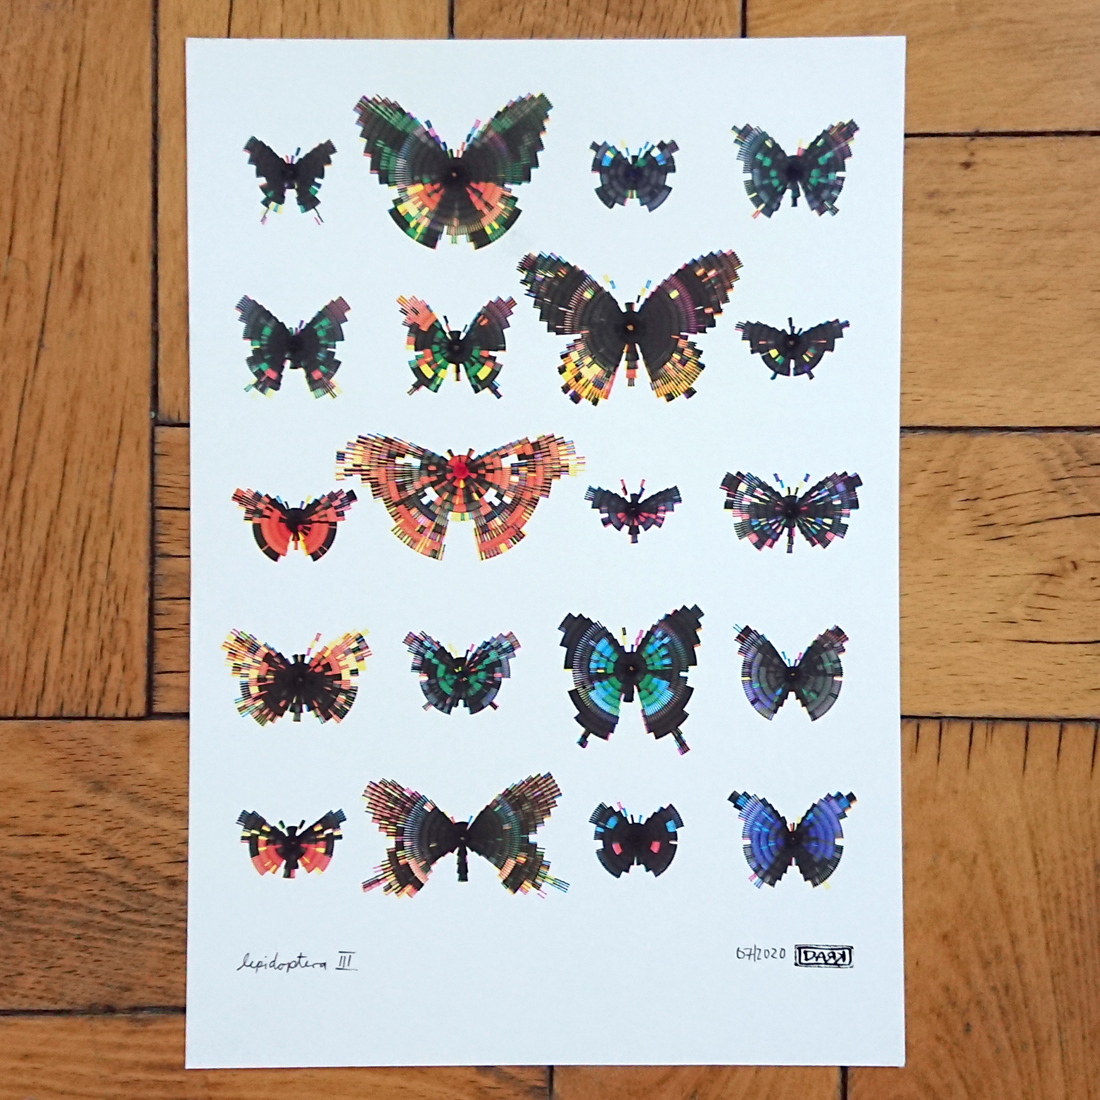 20 tiny butterlies - not to scale